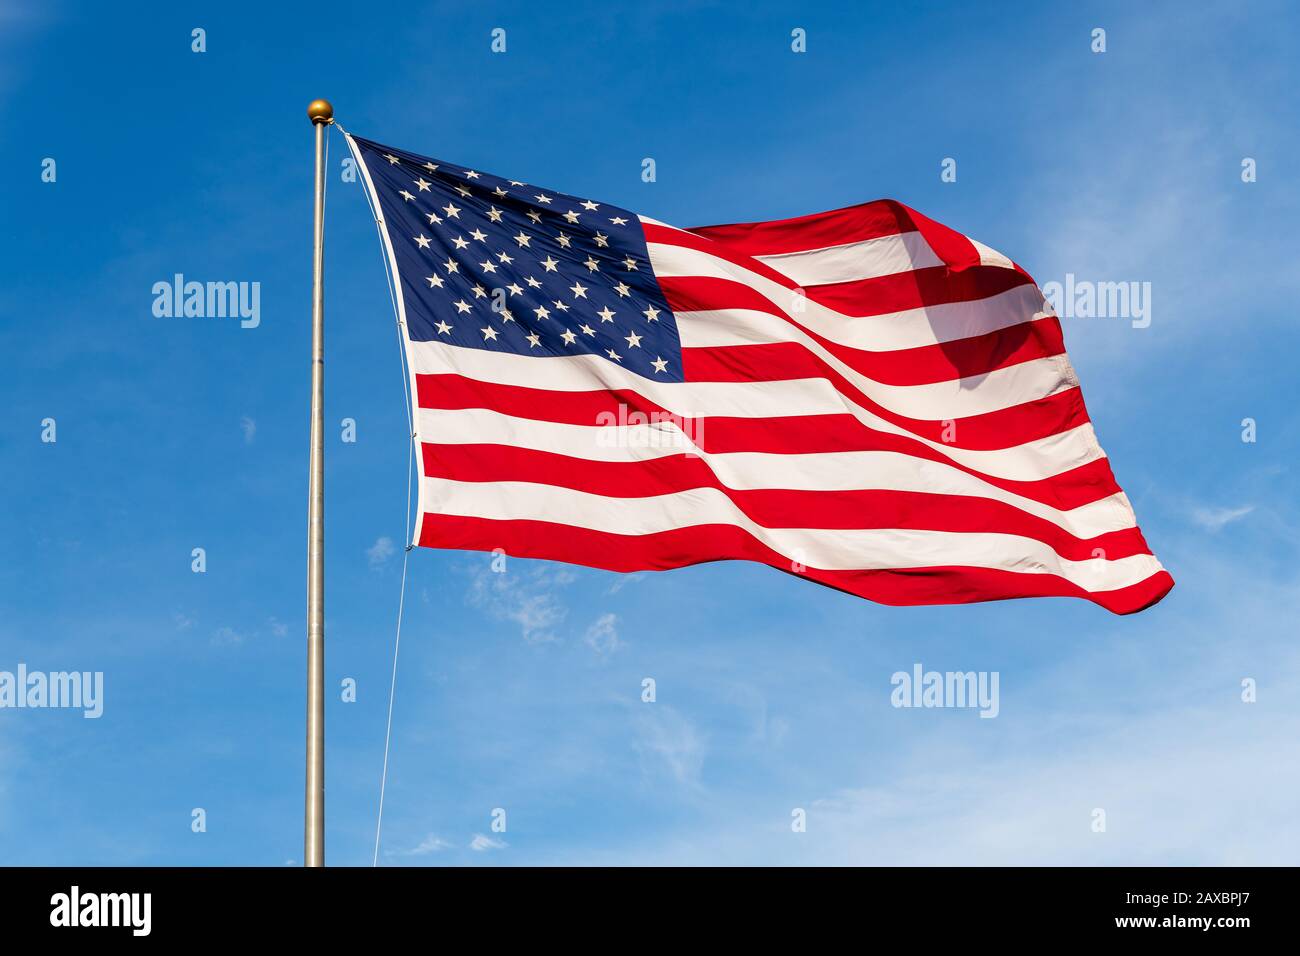 Demon Play Surprisingly hotel American Flag waving in the wind, with beautiful red white and blue colors  Stock Photo - Alamy